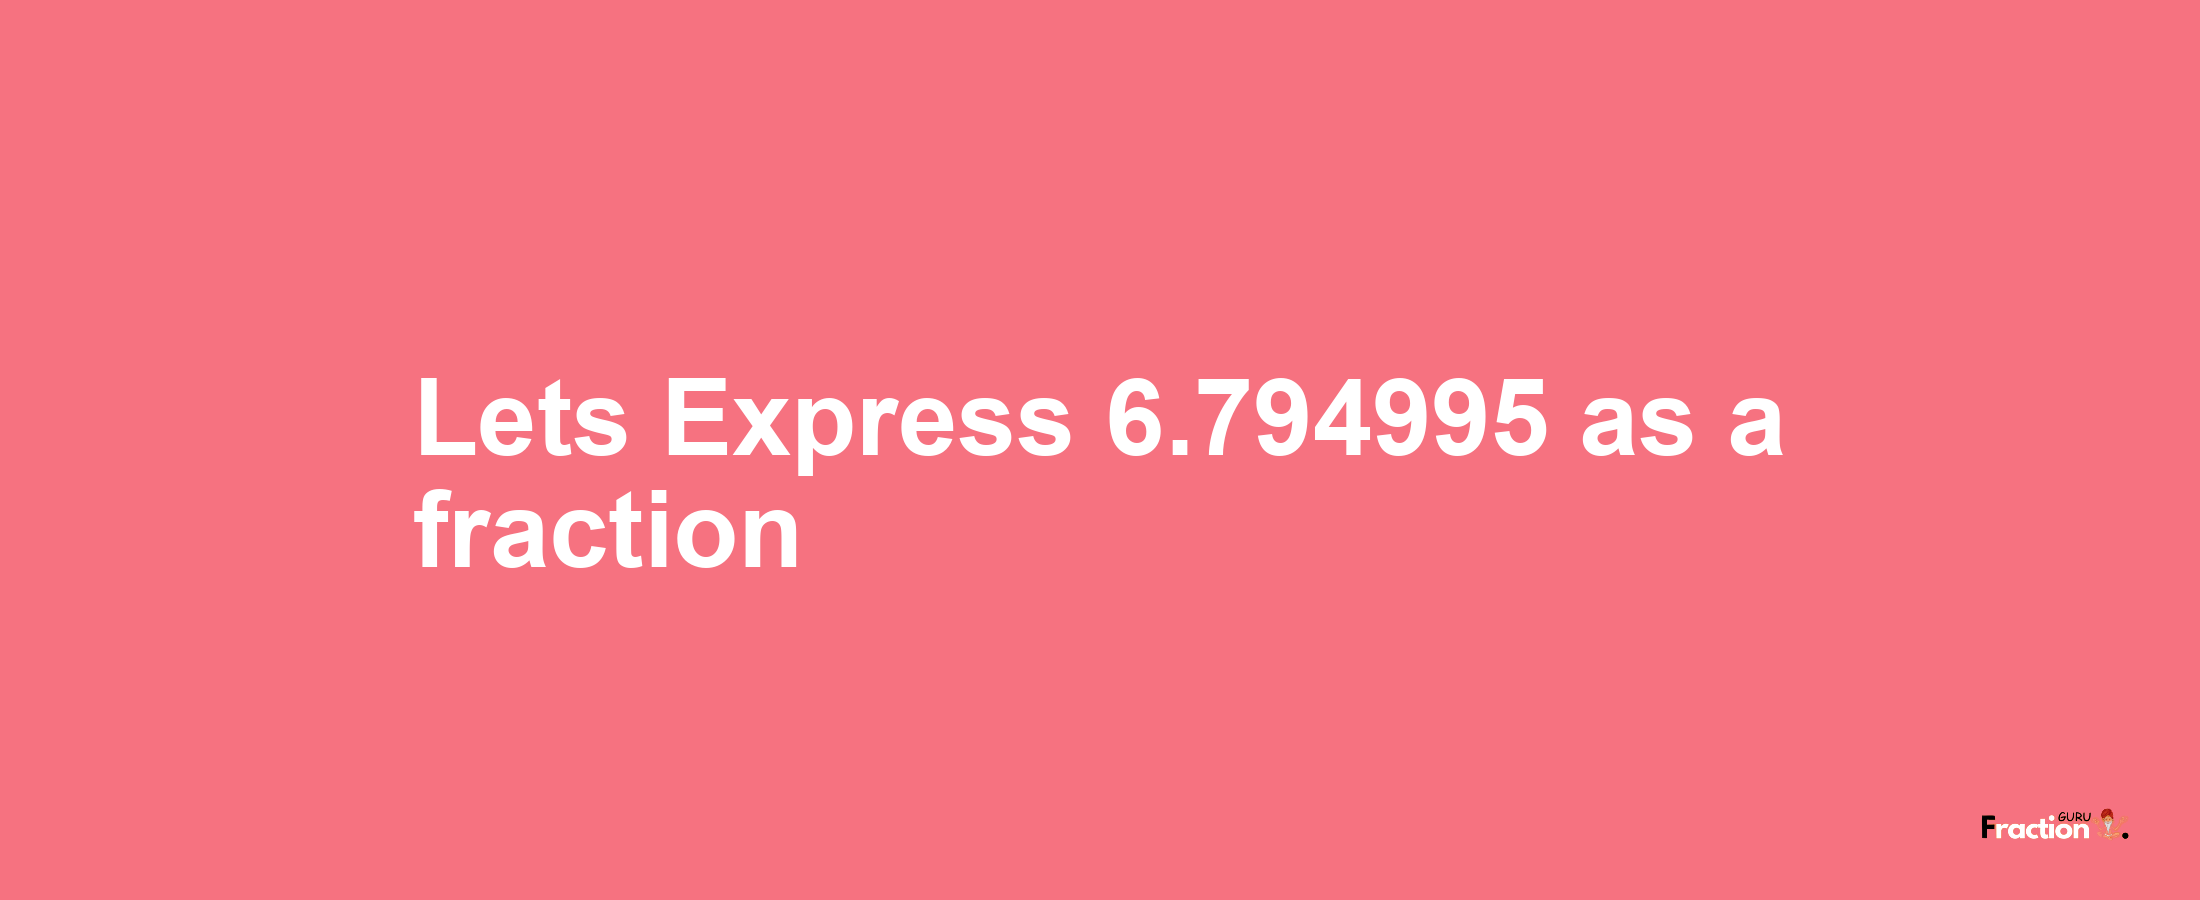 Lets Express 6.794995 as afraction